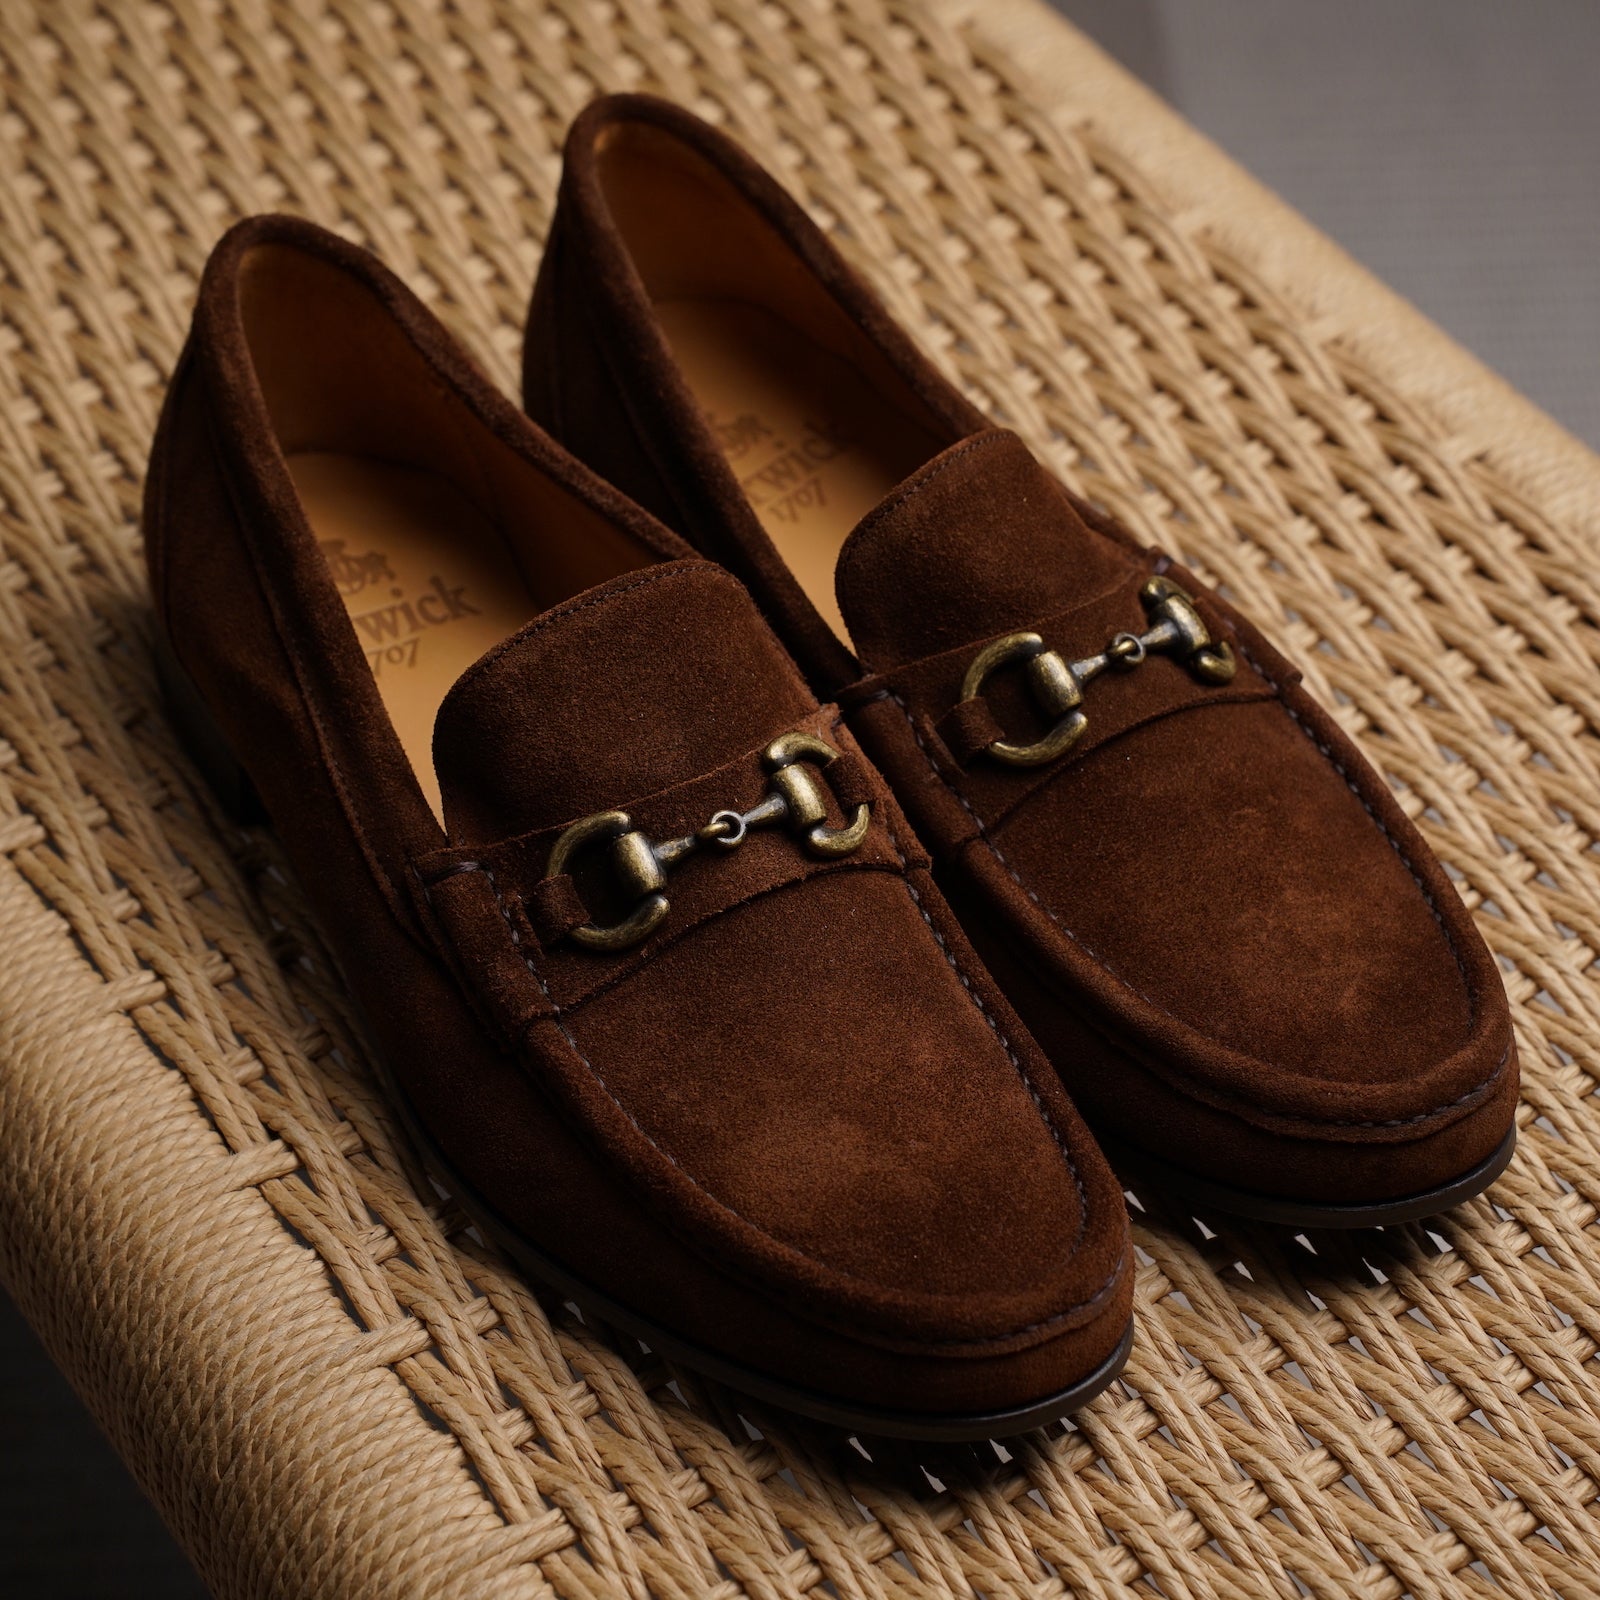 Bologna Bit Loafer - Snuff Brown Suede